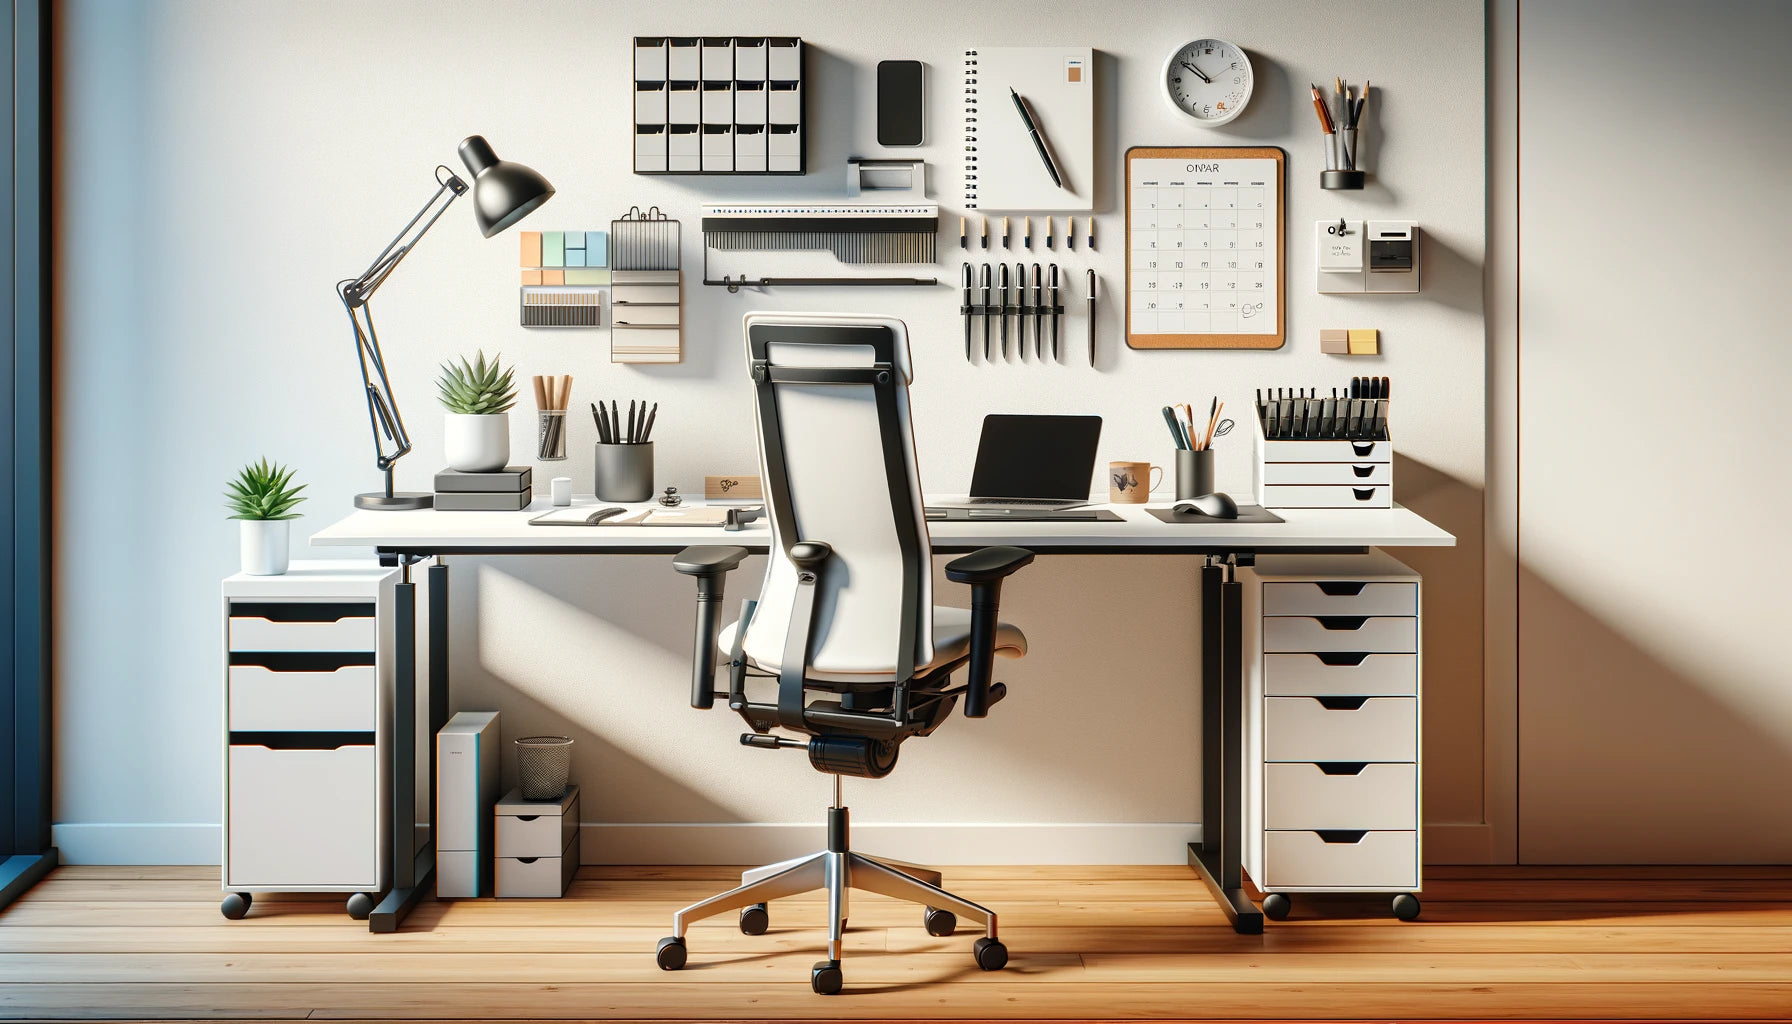 Organize Your Workspace: Top 10 Essential Office Supplies for Productivity